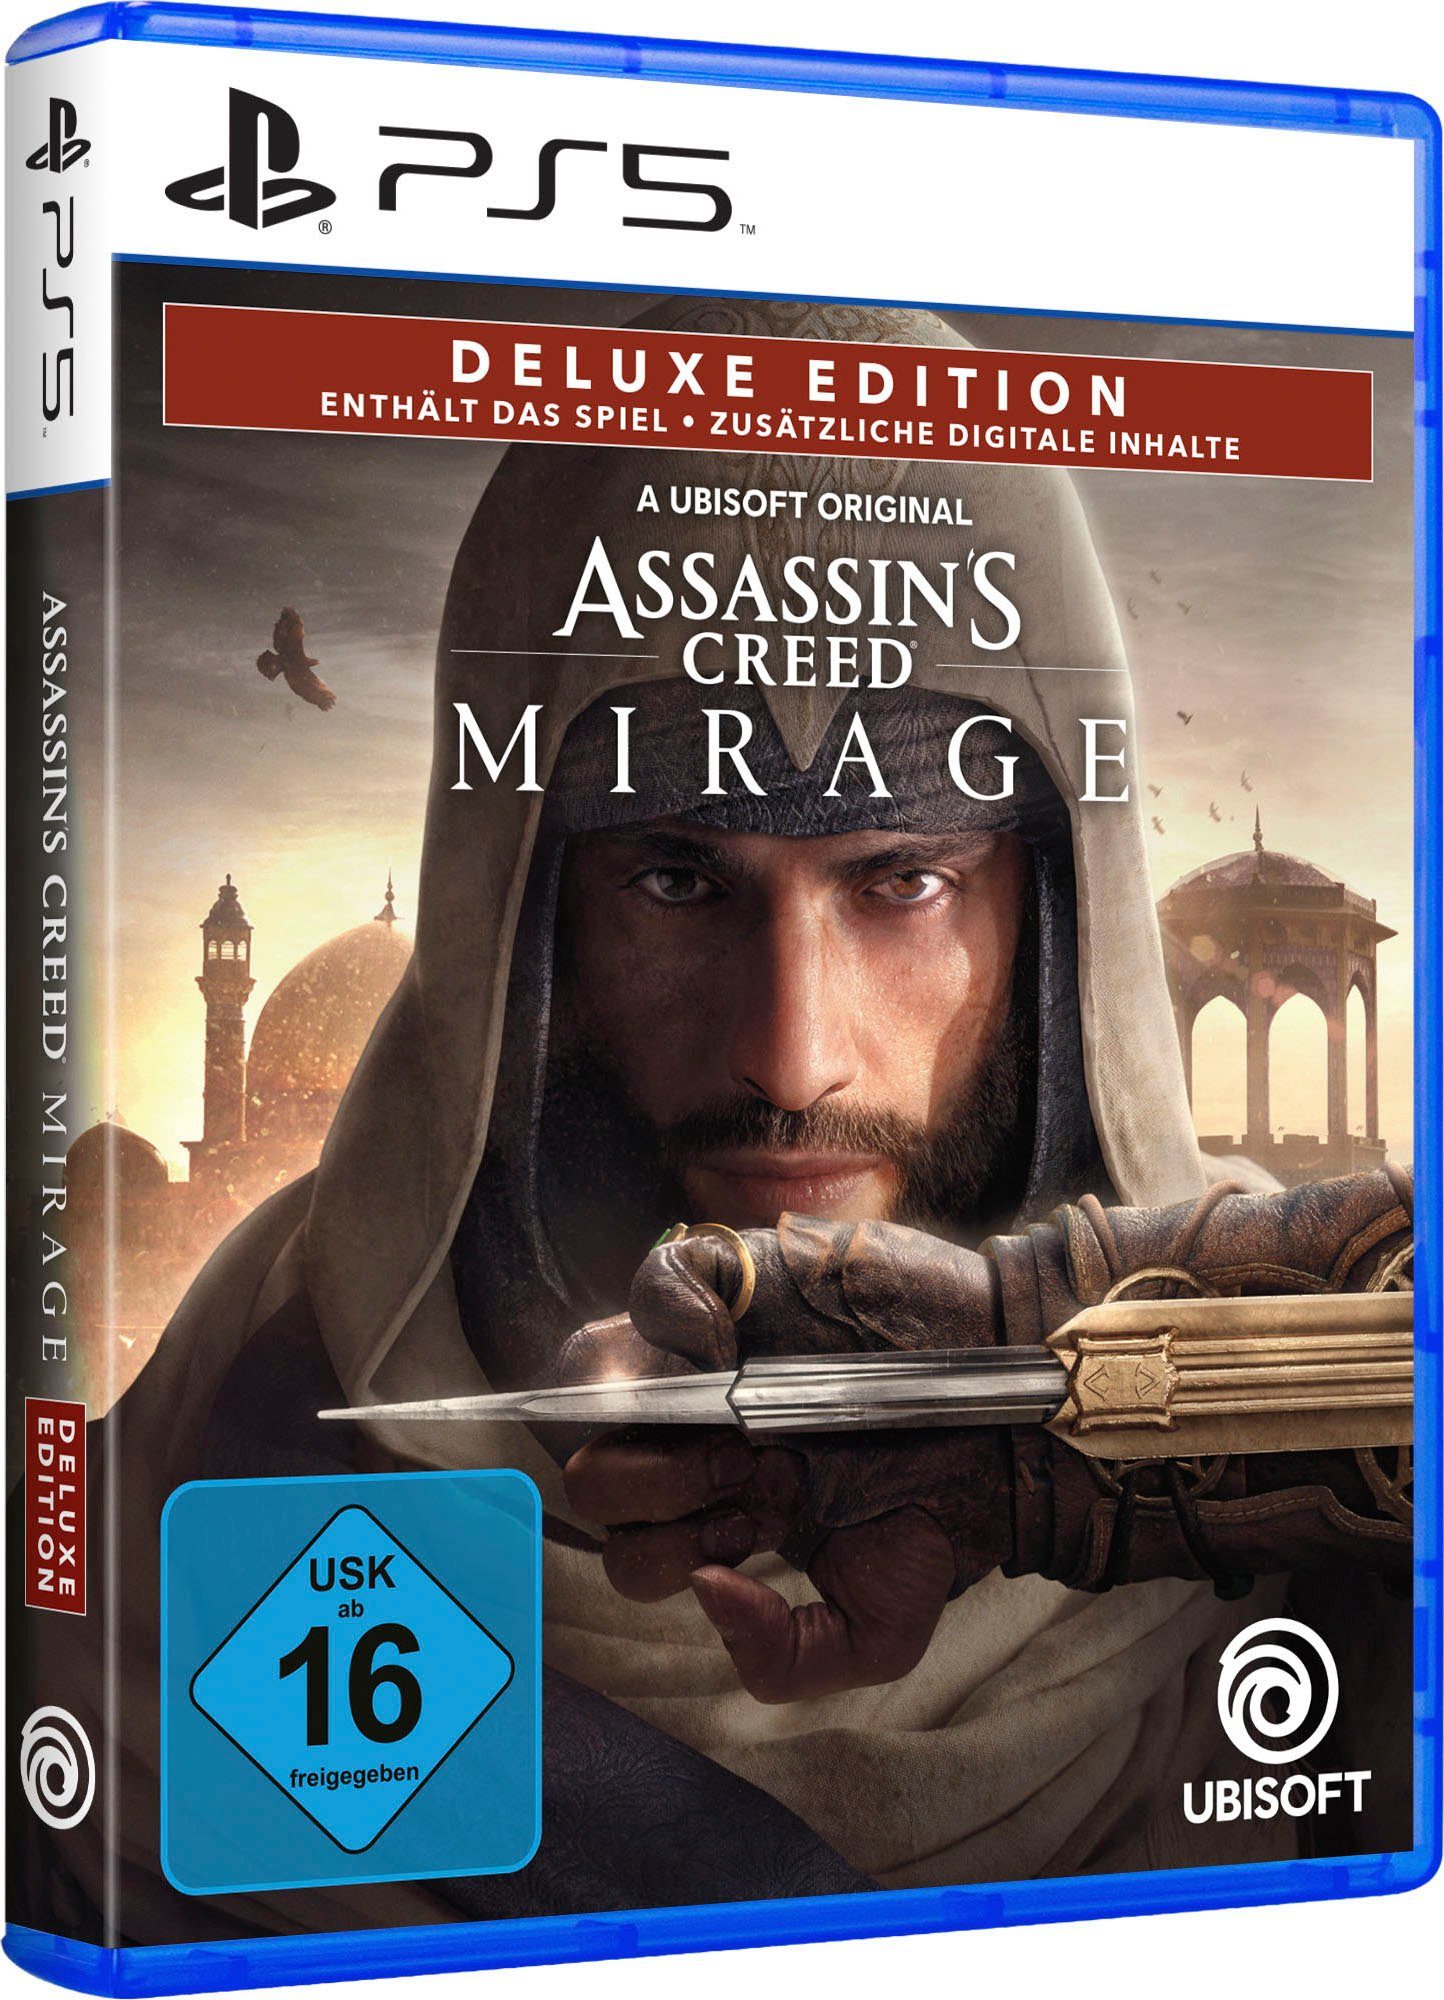 UBISOFT Assassin's Creed Edition Deluxe - Mirage 5 PlayStation